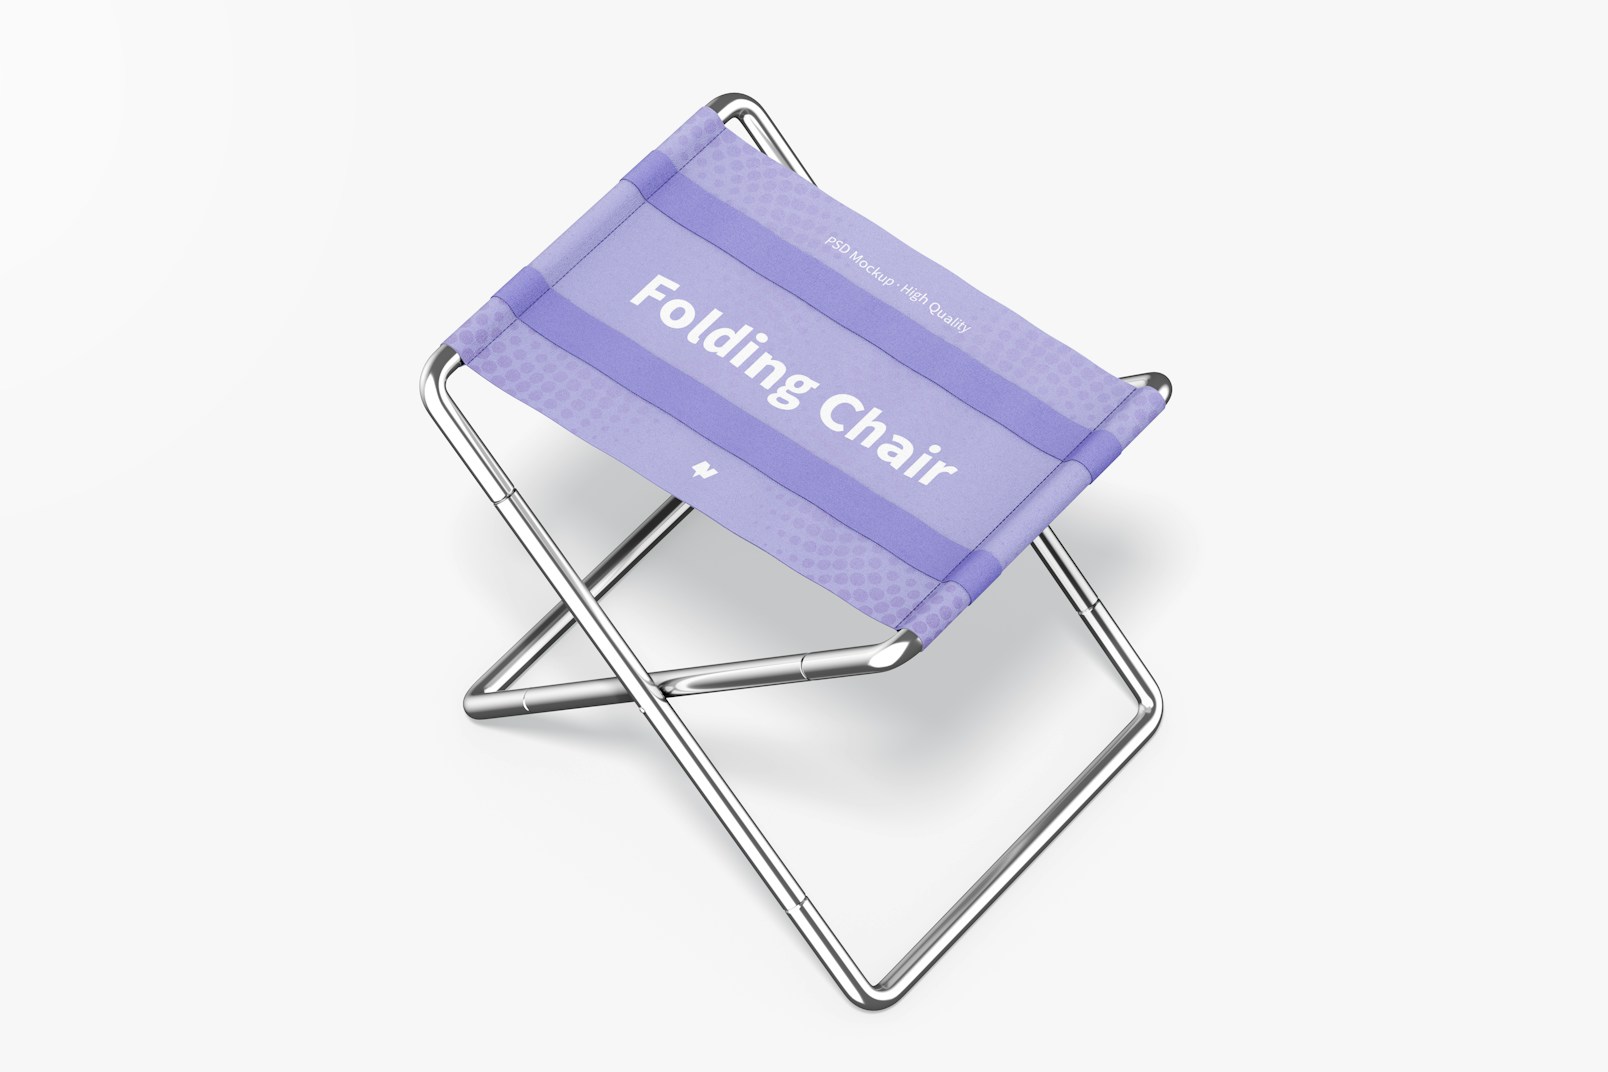 Folding Chairs Mockup, Perspective